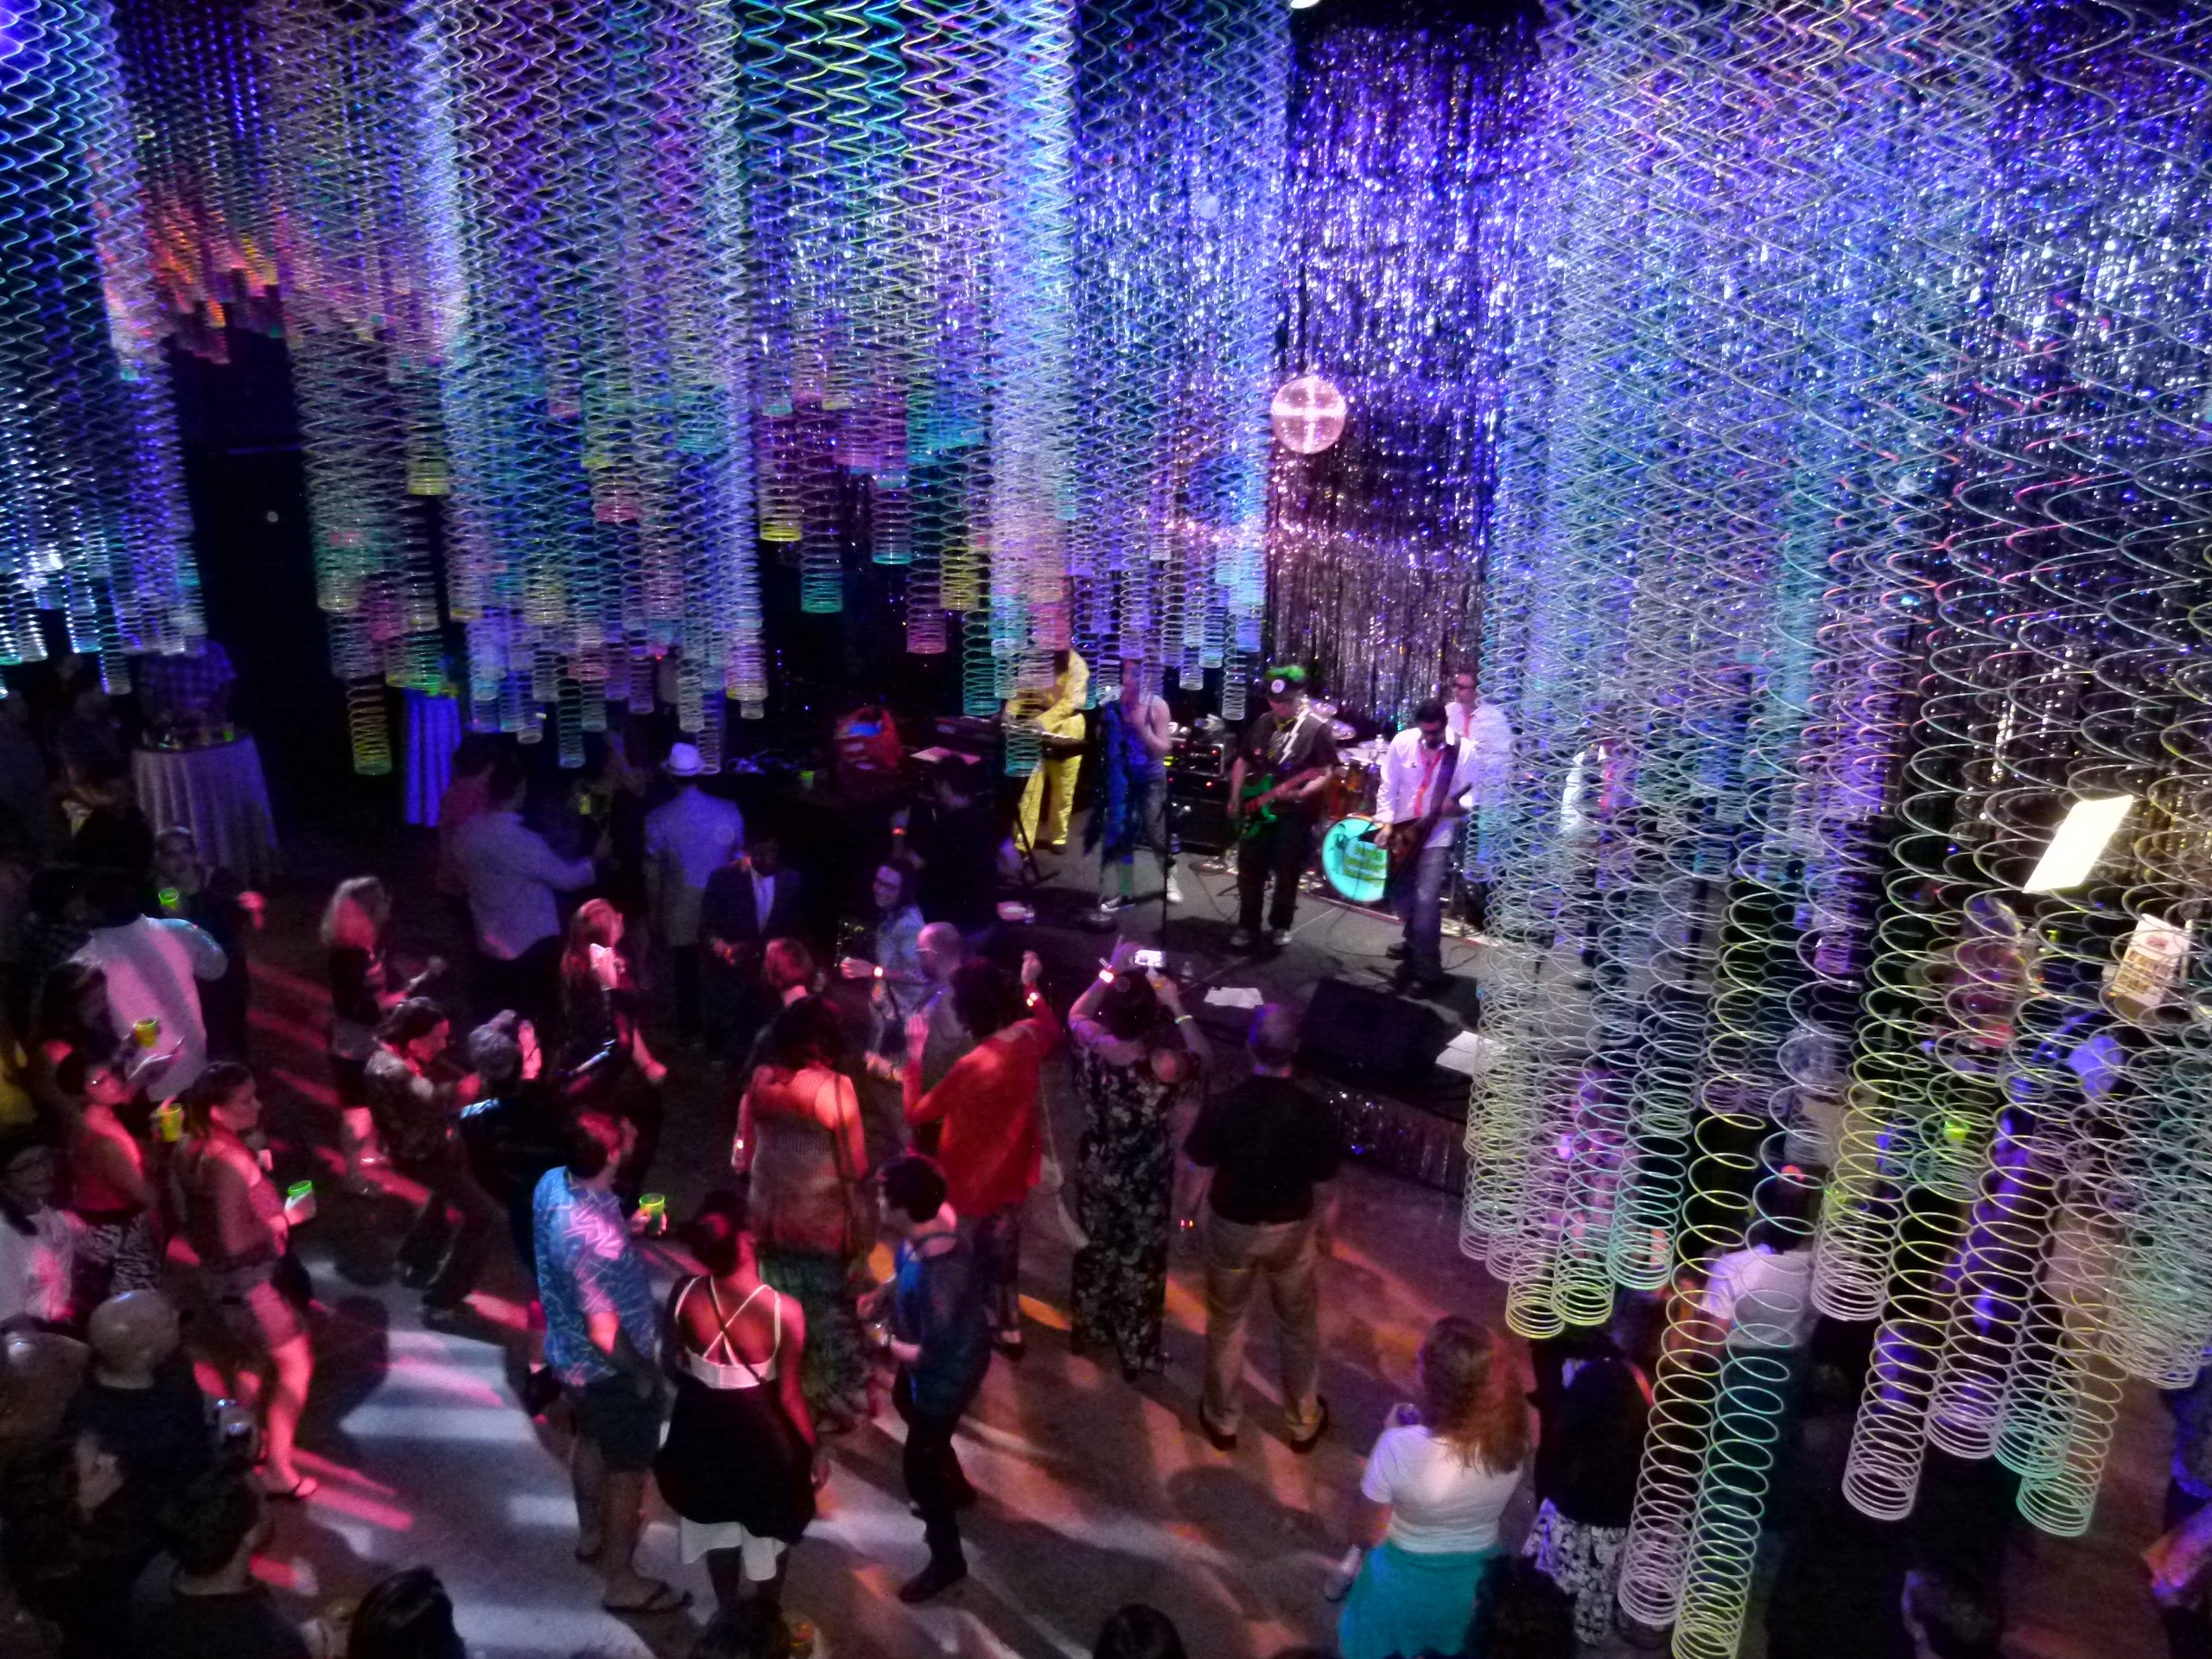 Ferris Bueller's Revenge! played the '80s room, which was creatively decorated with multicolored Slinkys, as people danced.